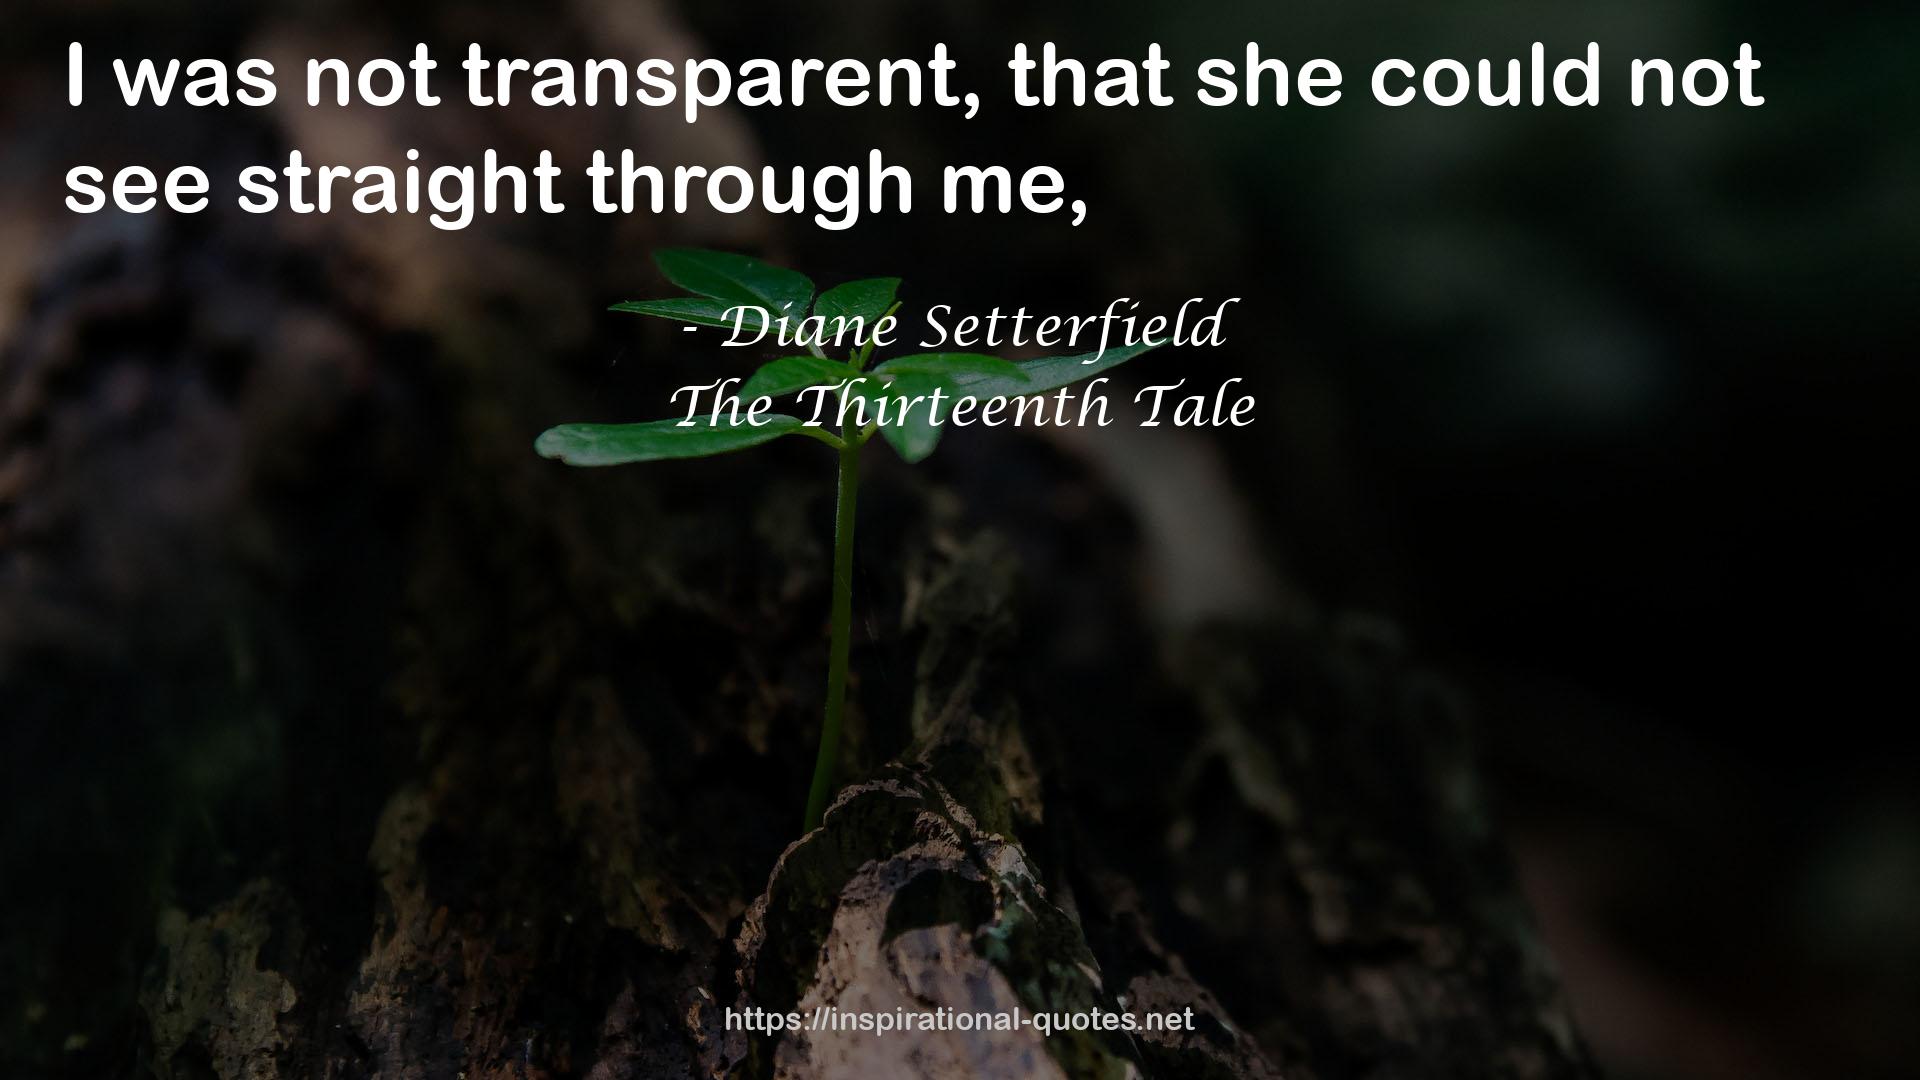 The Thirteenth Tale QUOTES